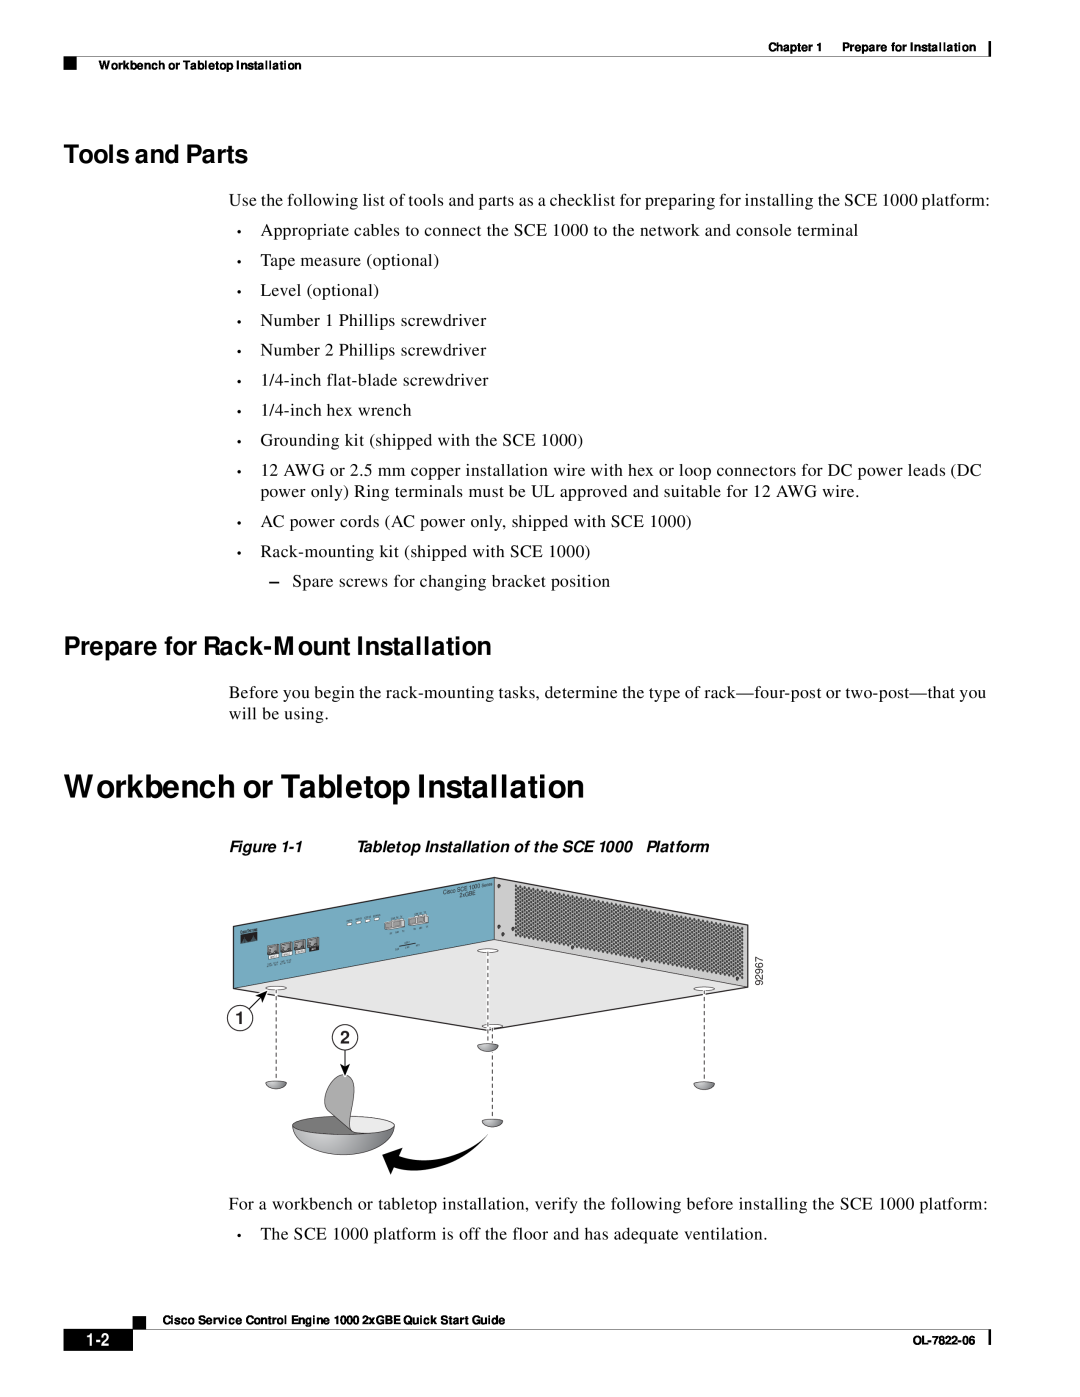 Cisco Systems OL-7822-06 Workbench or Tabletop Installation, Tools and Parts, Prepare for Rack-Mount Installation 